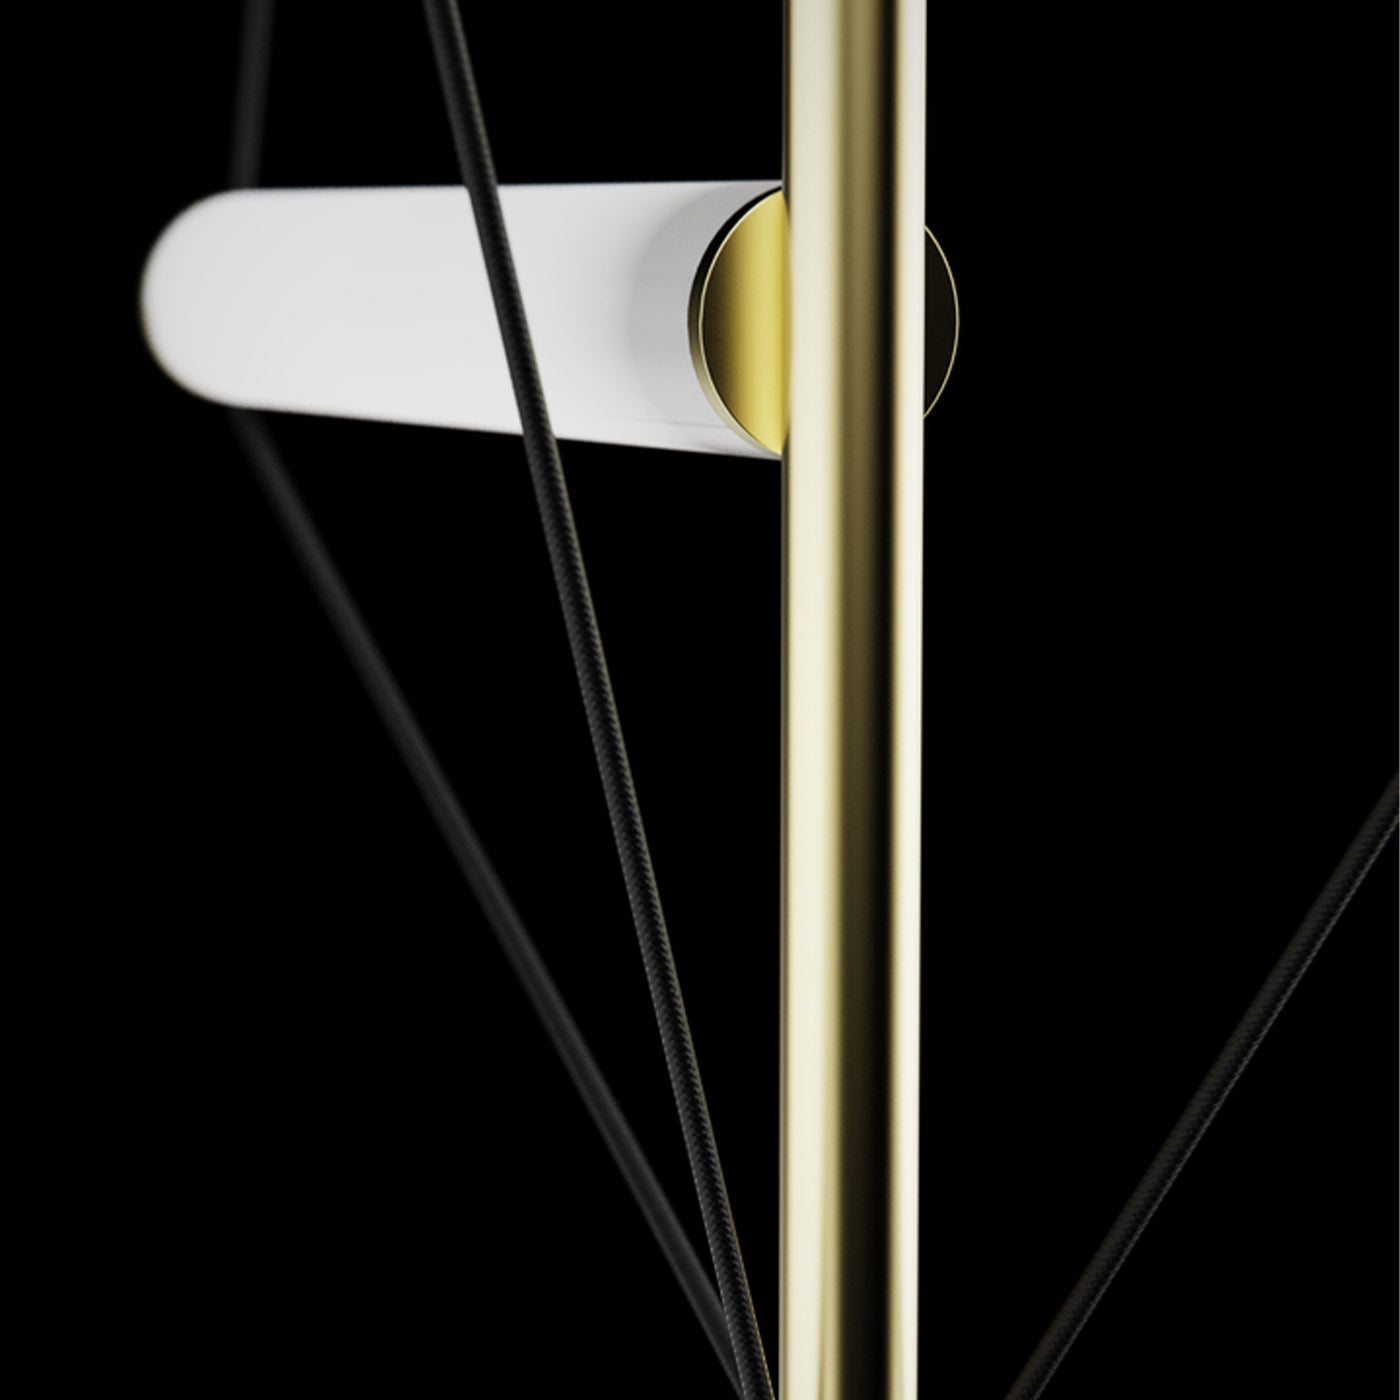 Ed047 Brass Floor Lamp with White Base - Alternative view 3